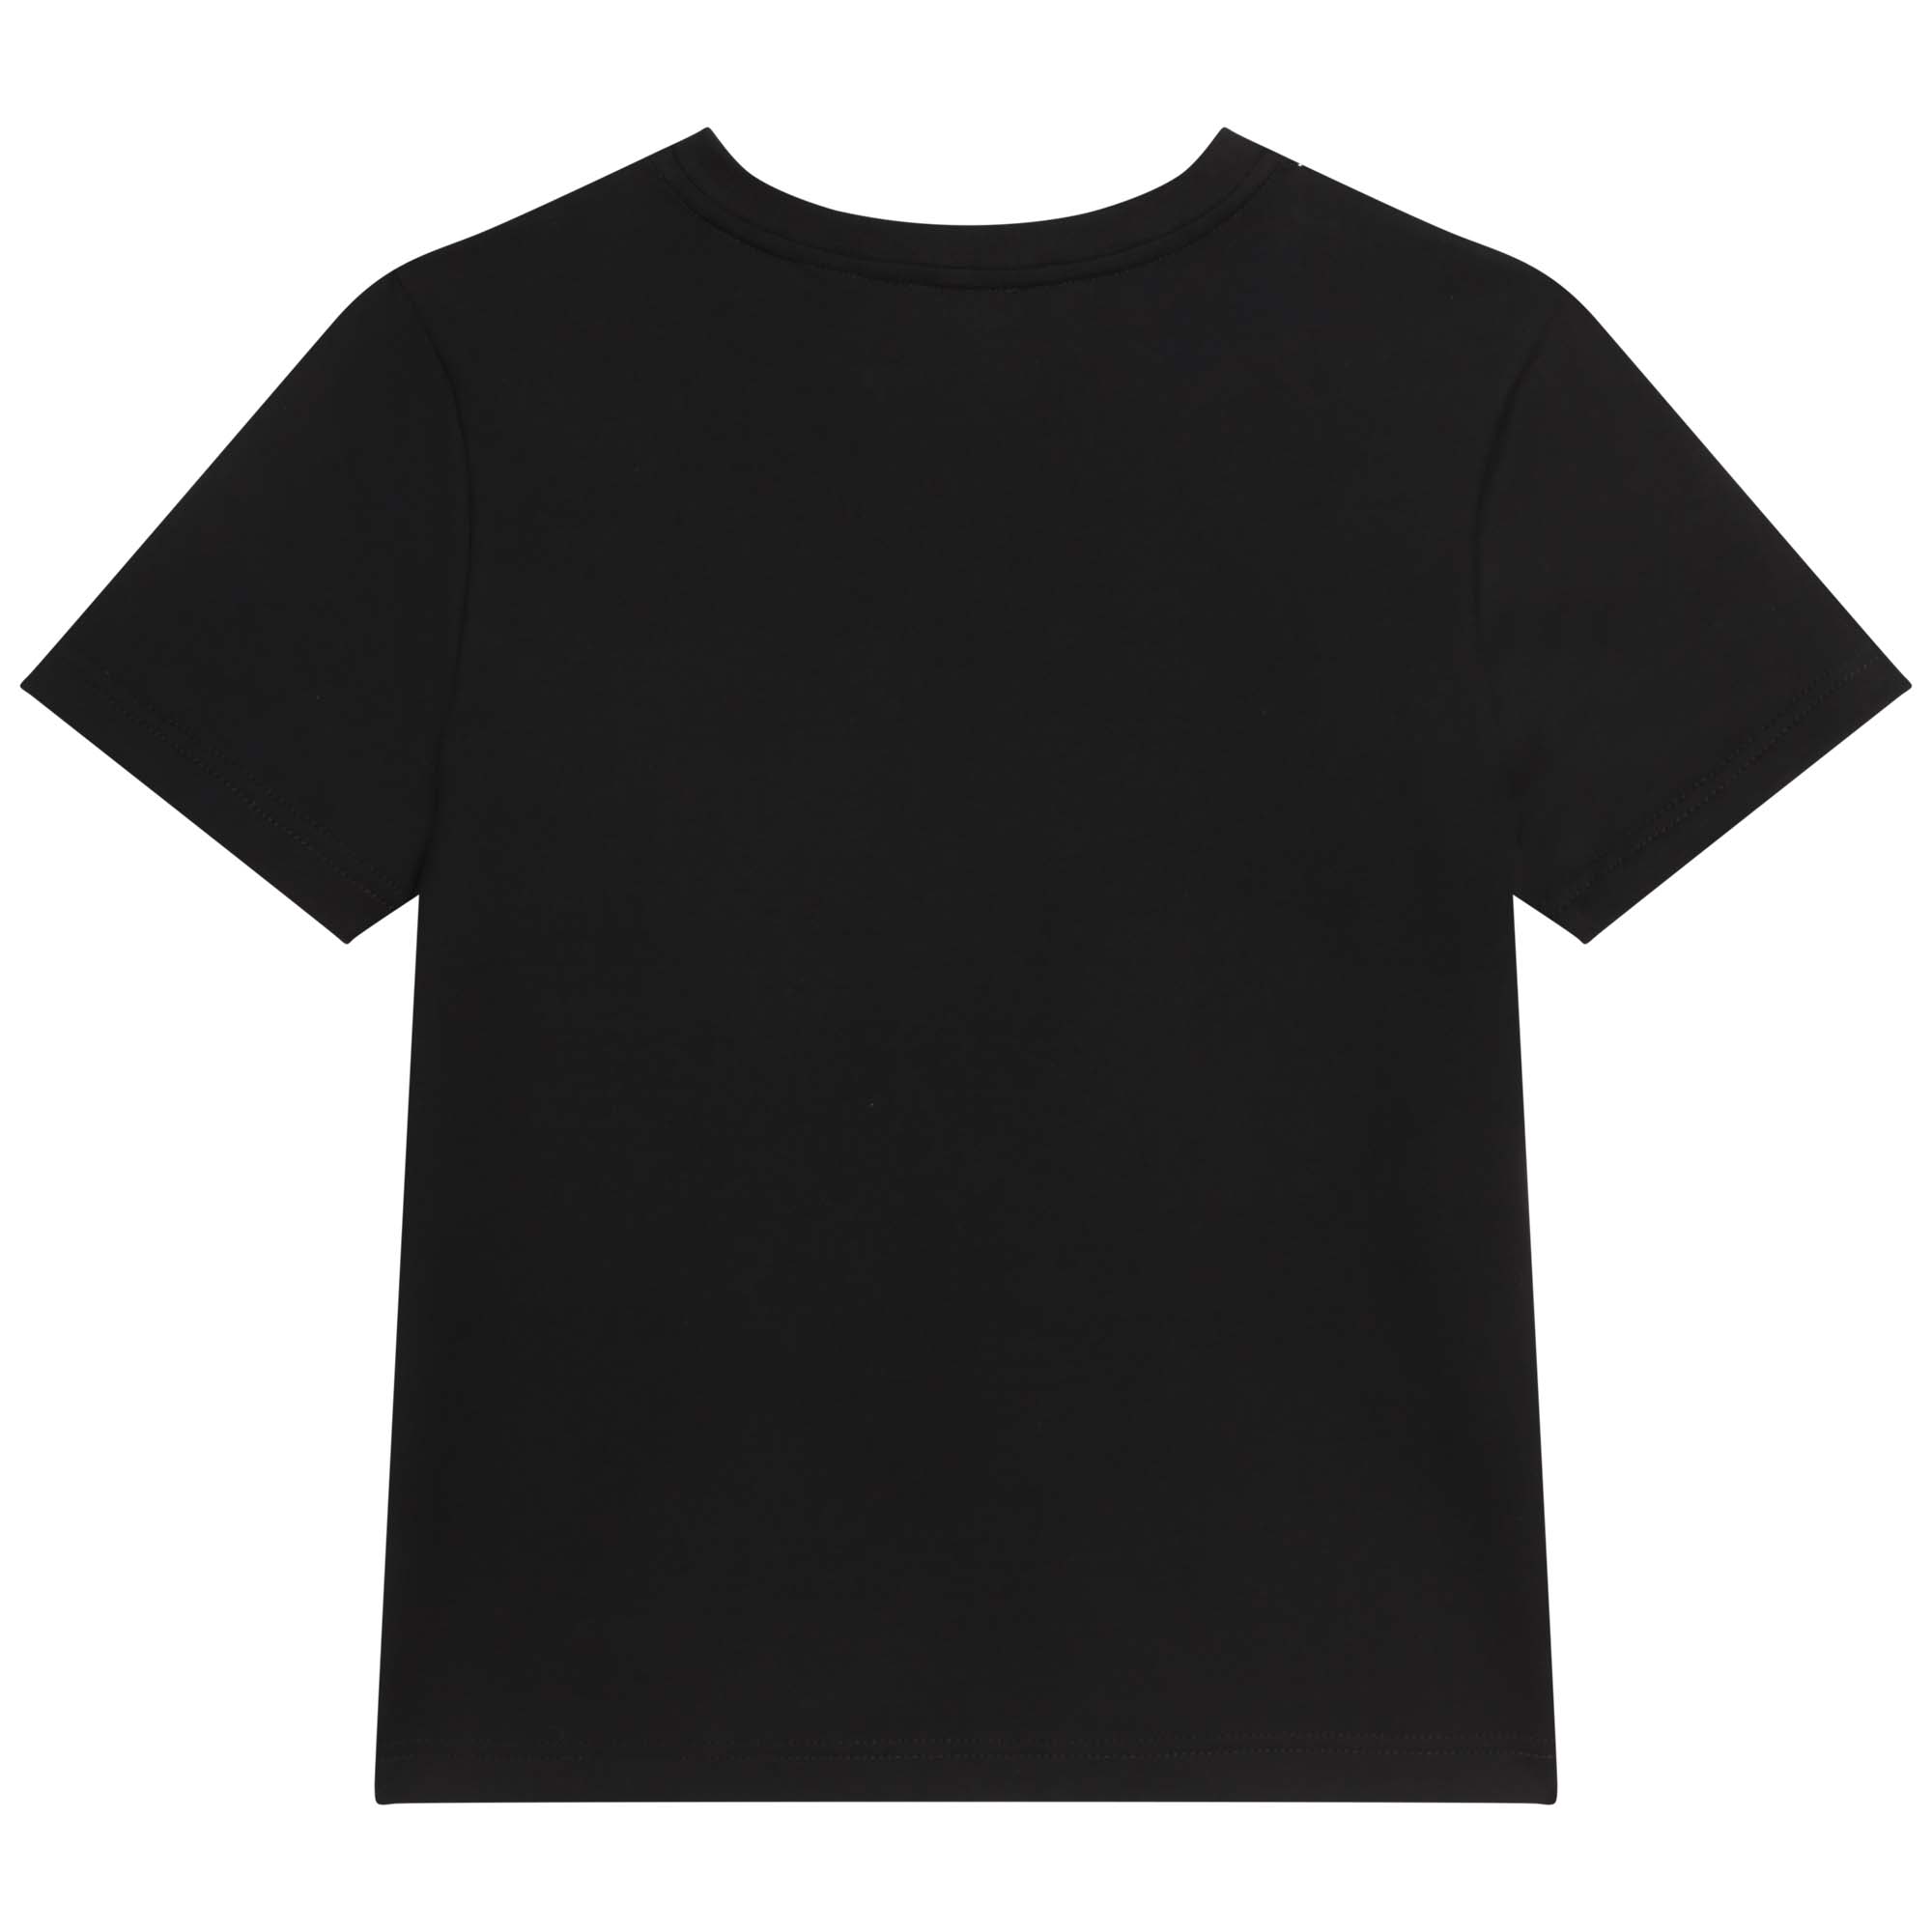 Embroidered T-shirt GIVENCHY for BOY